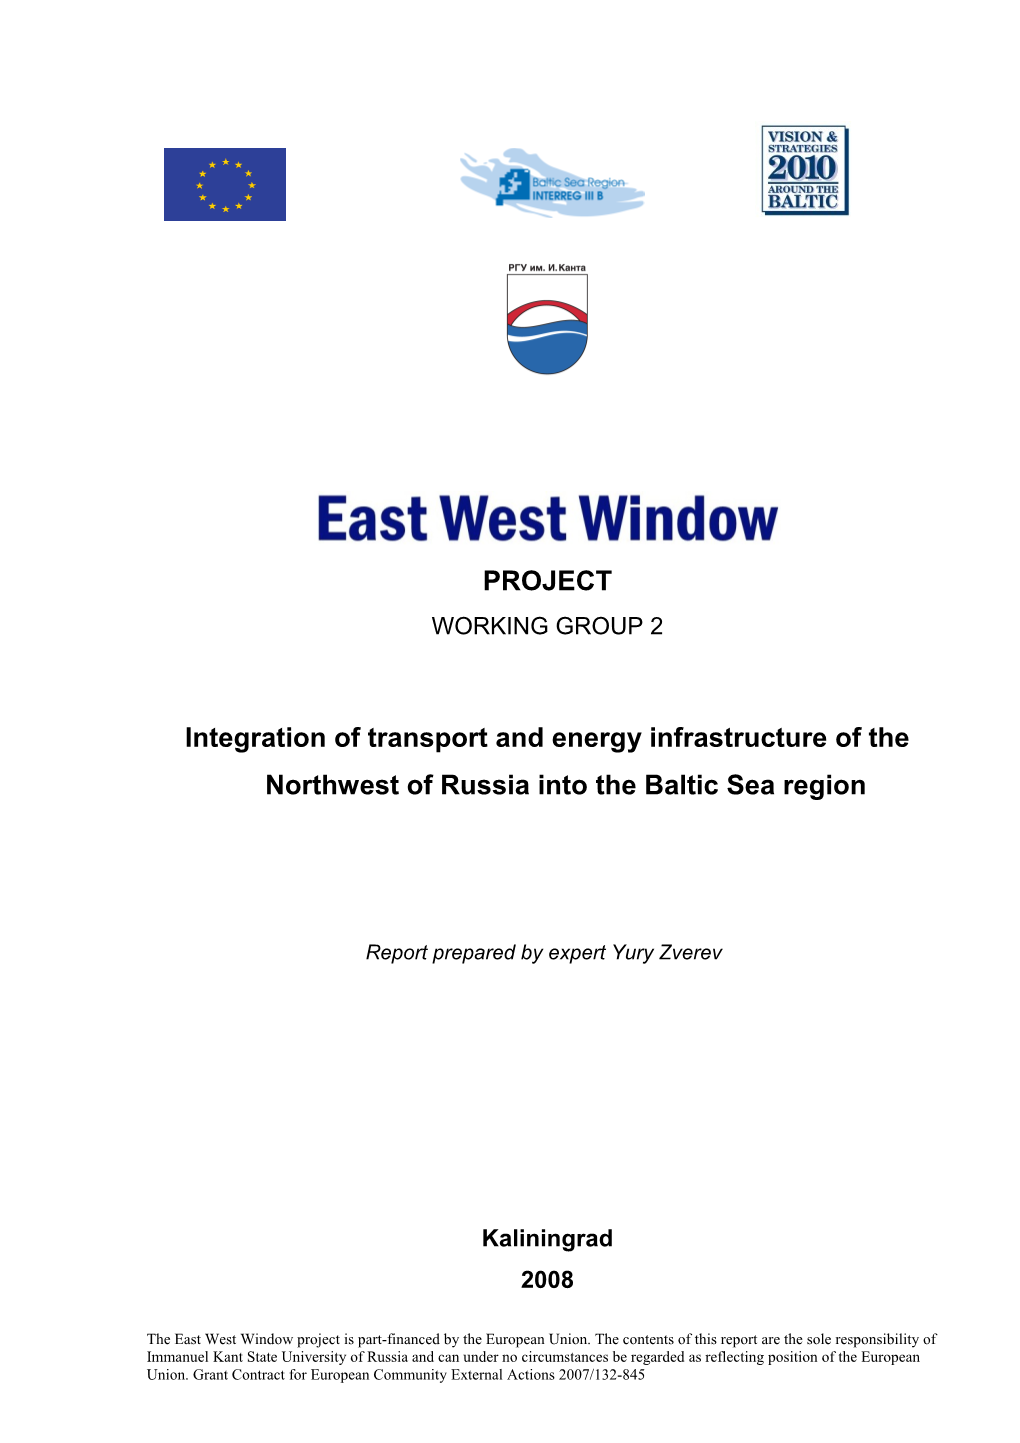 Integration of Transport and Energy Infrastructure of the Northwest of Russia Into The